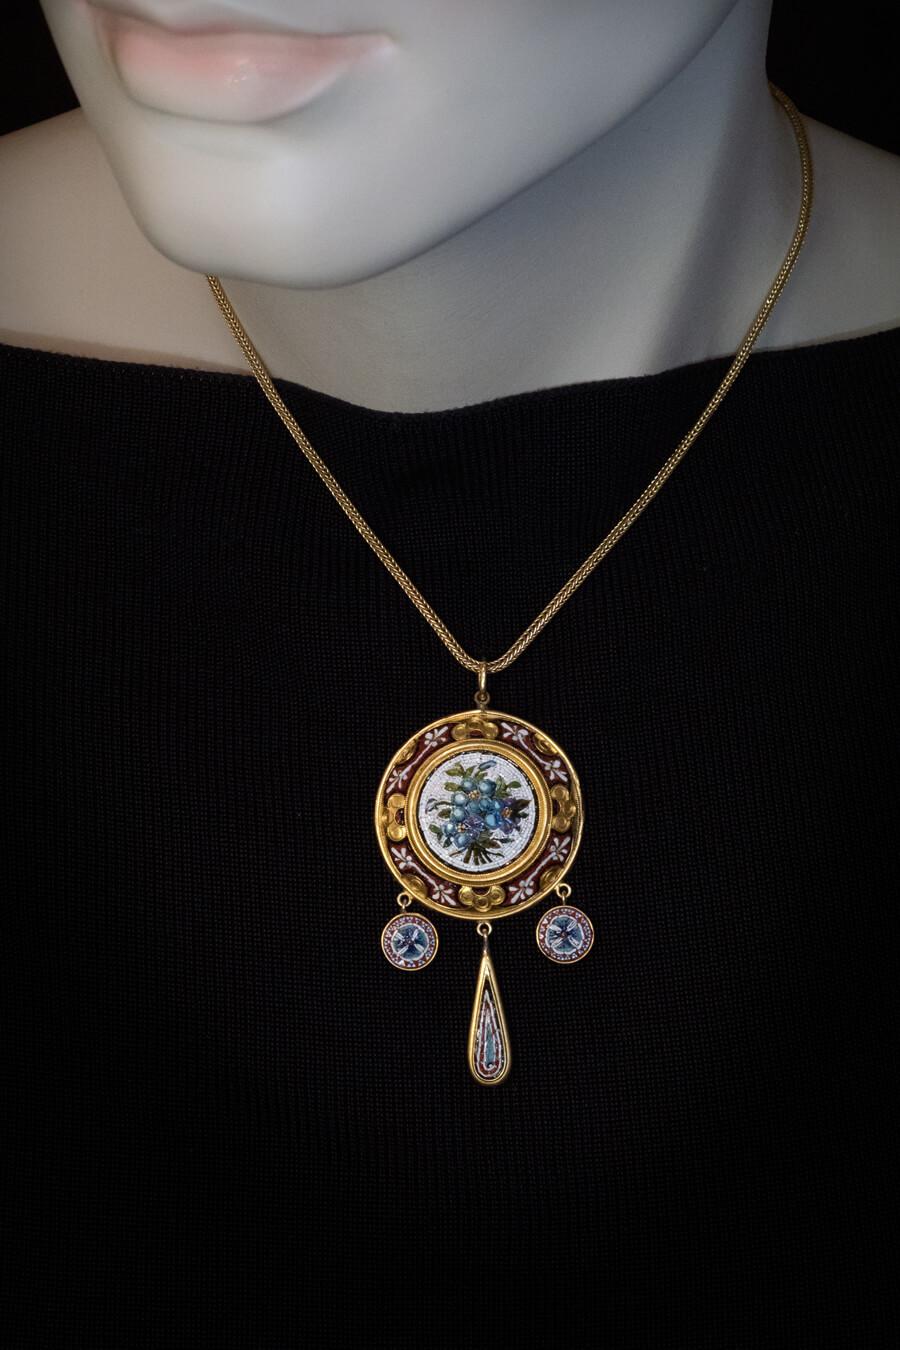 Italian, circa 1850s-1860s, probably made at Vatican workshops.
The pendant is crafted in 18K gold. It is designed in Etruscan revival style, fashionable in the mid 19th century, and embellished with fine micro mosaics of floral and berry